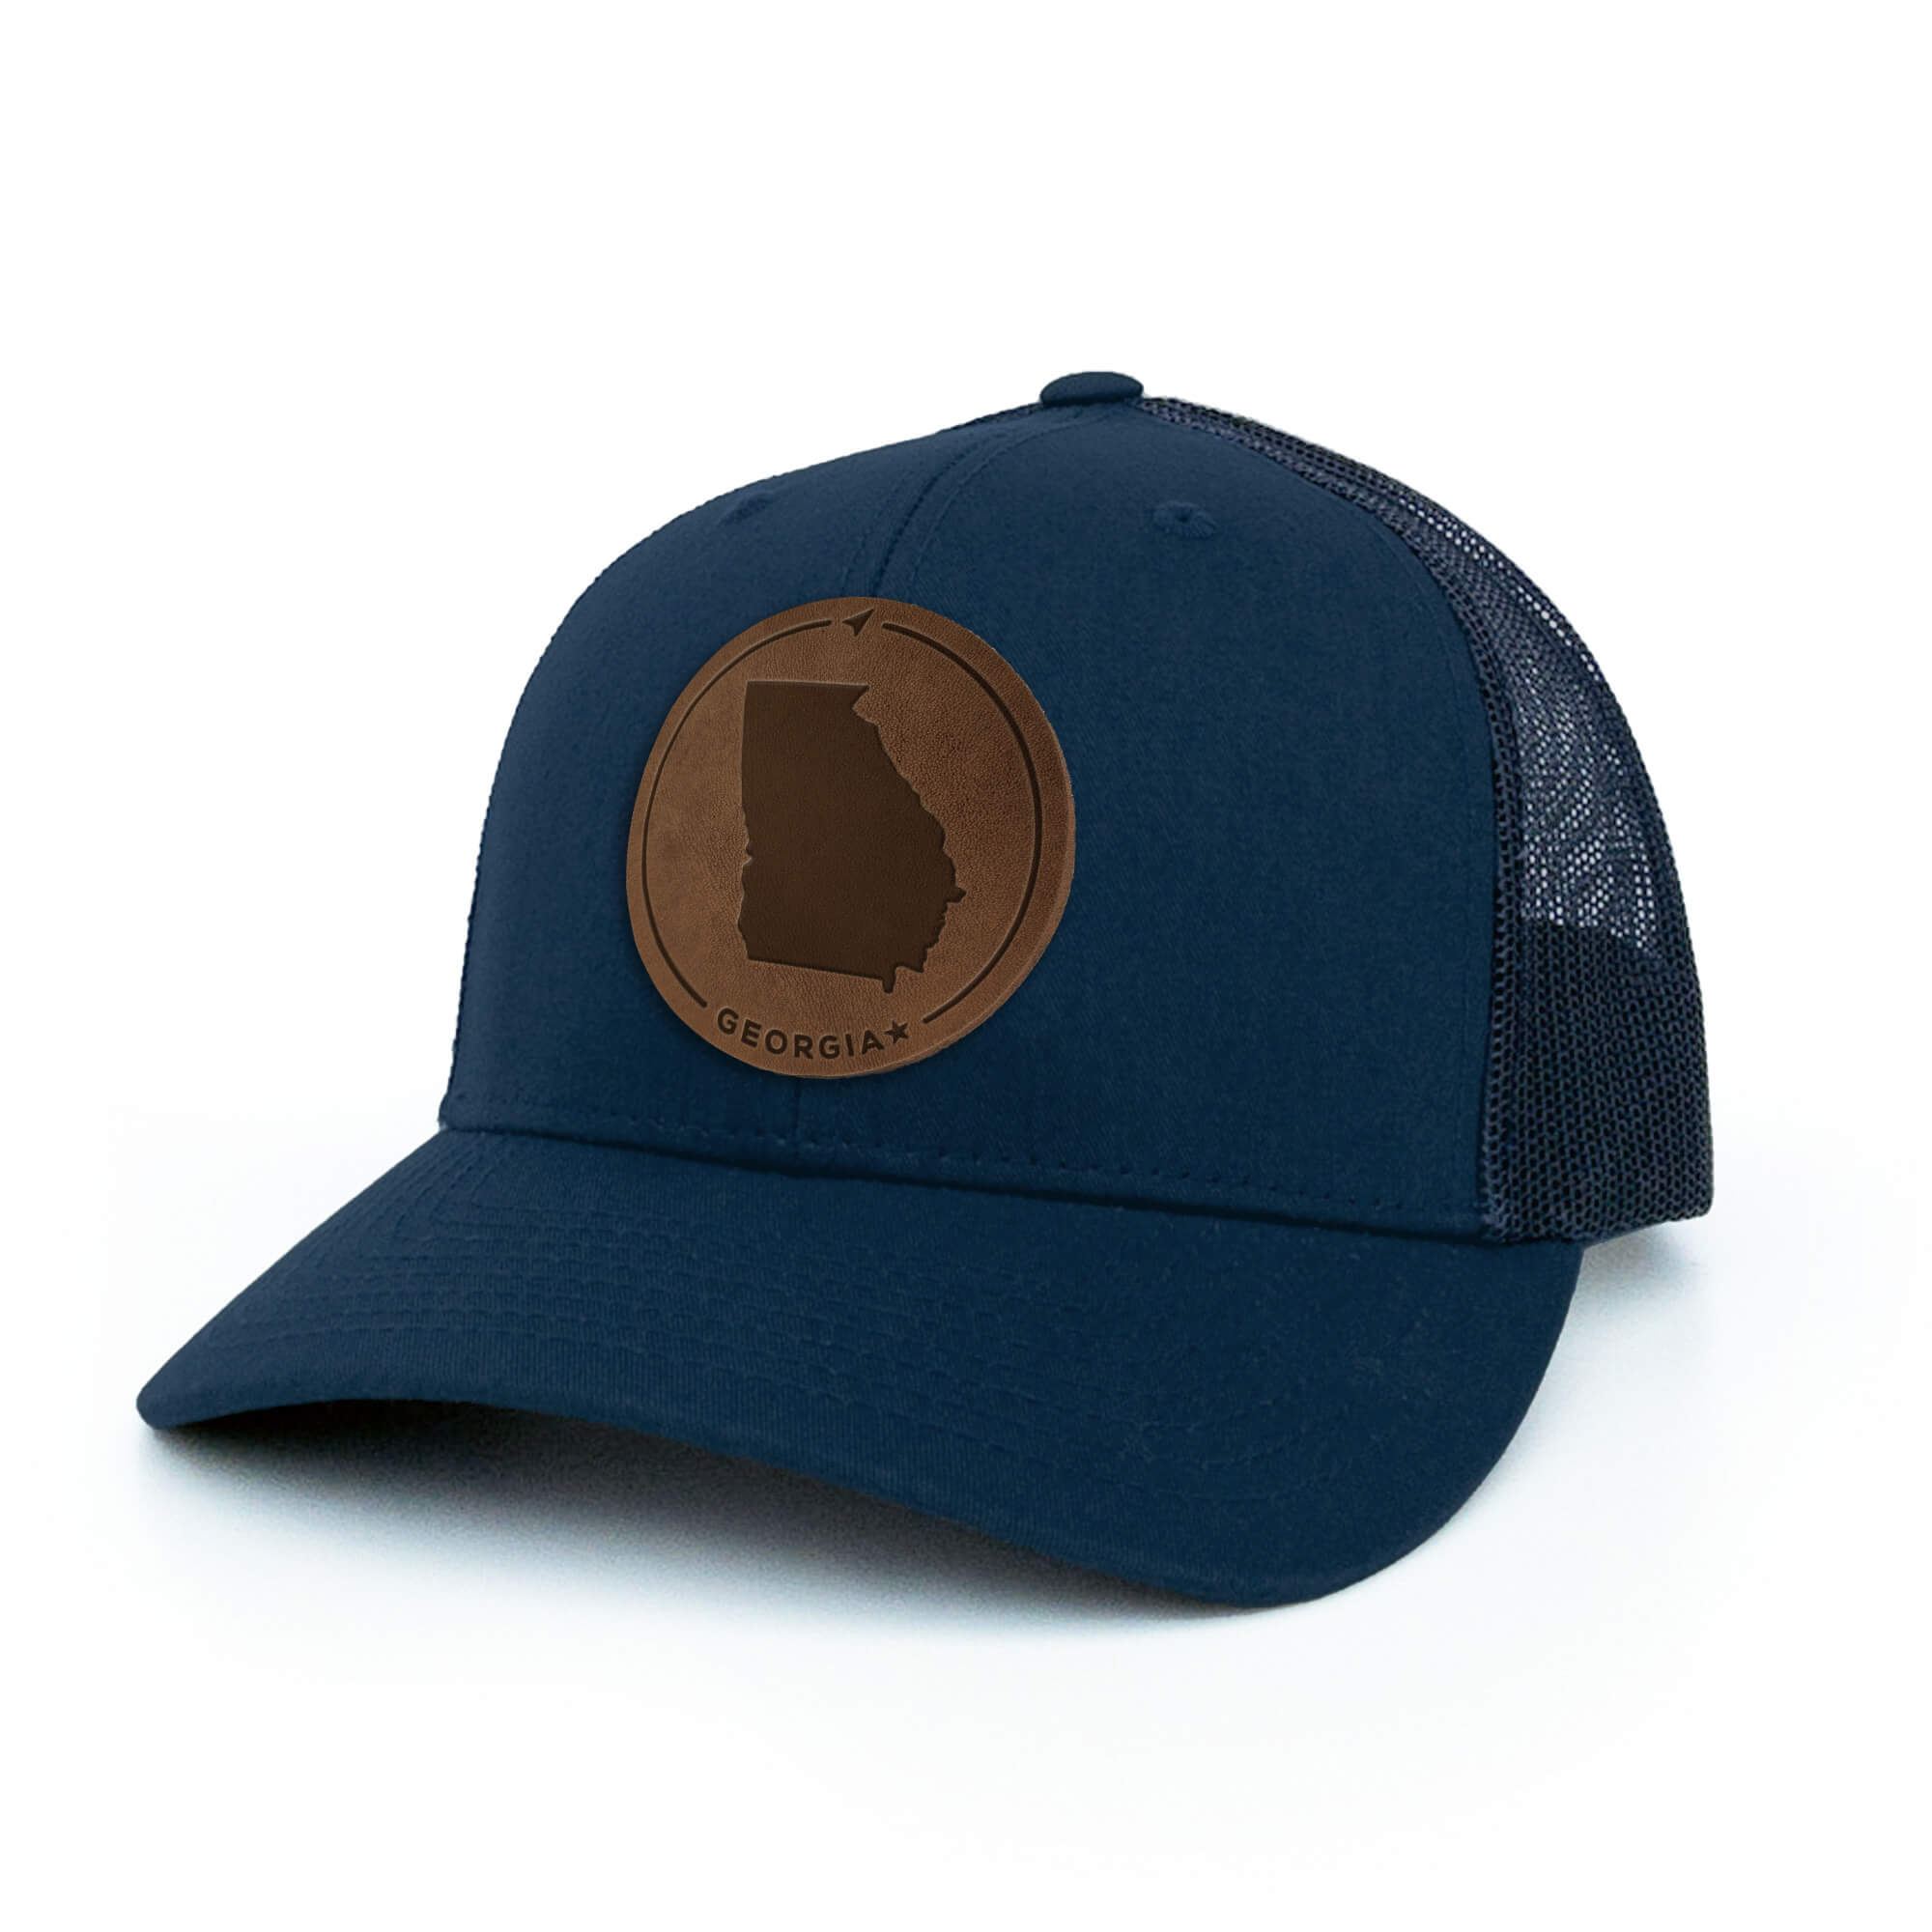 Navy trucker hat with full-grain leather patch of Georgia | BLACK-003-009, CHARC-003-009, NAVY-003-009, HGREY-003-009, MOSS-003-009, BROWN-003-009